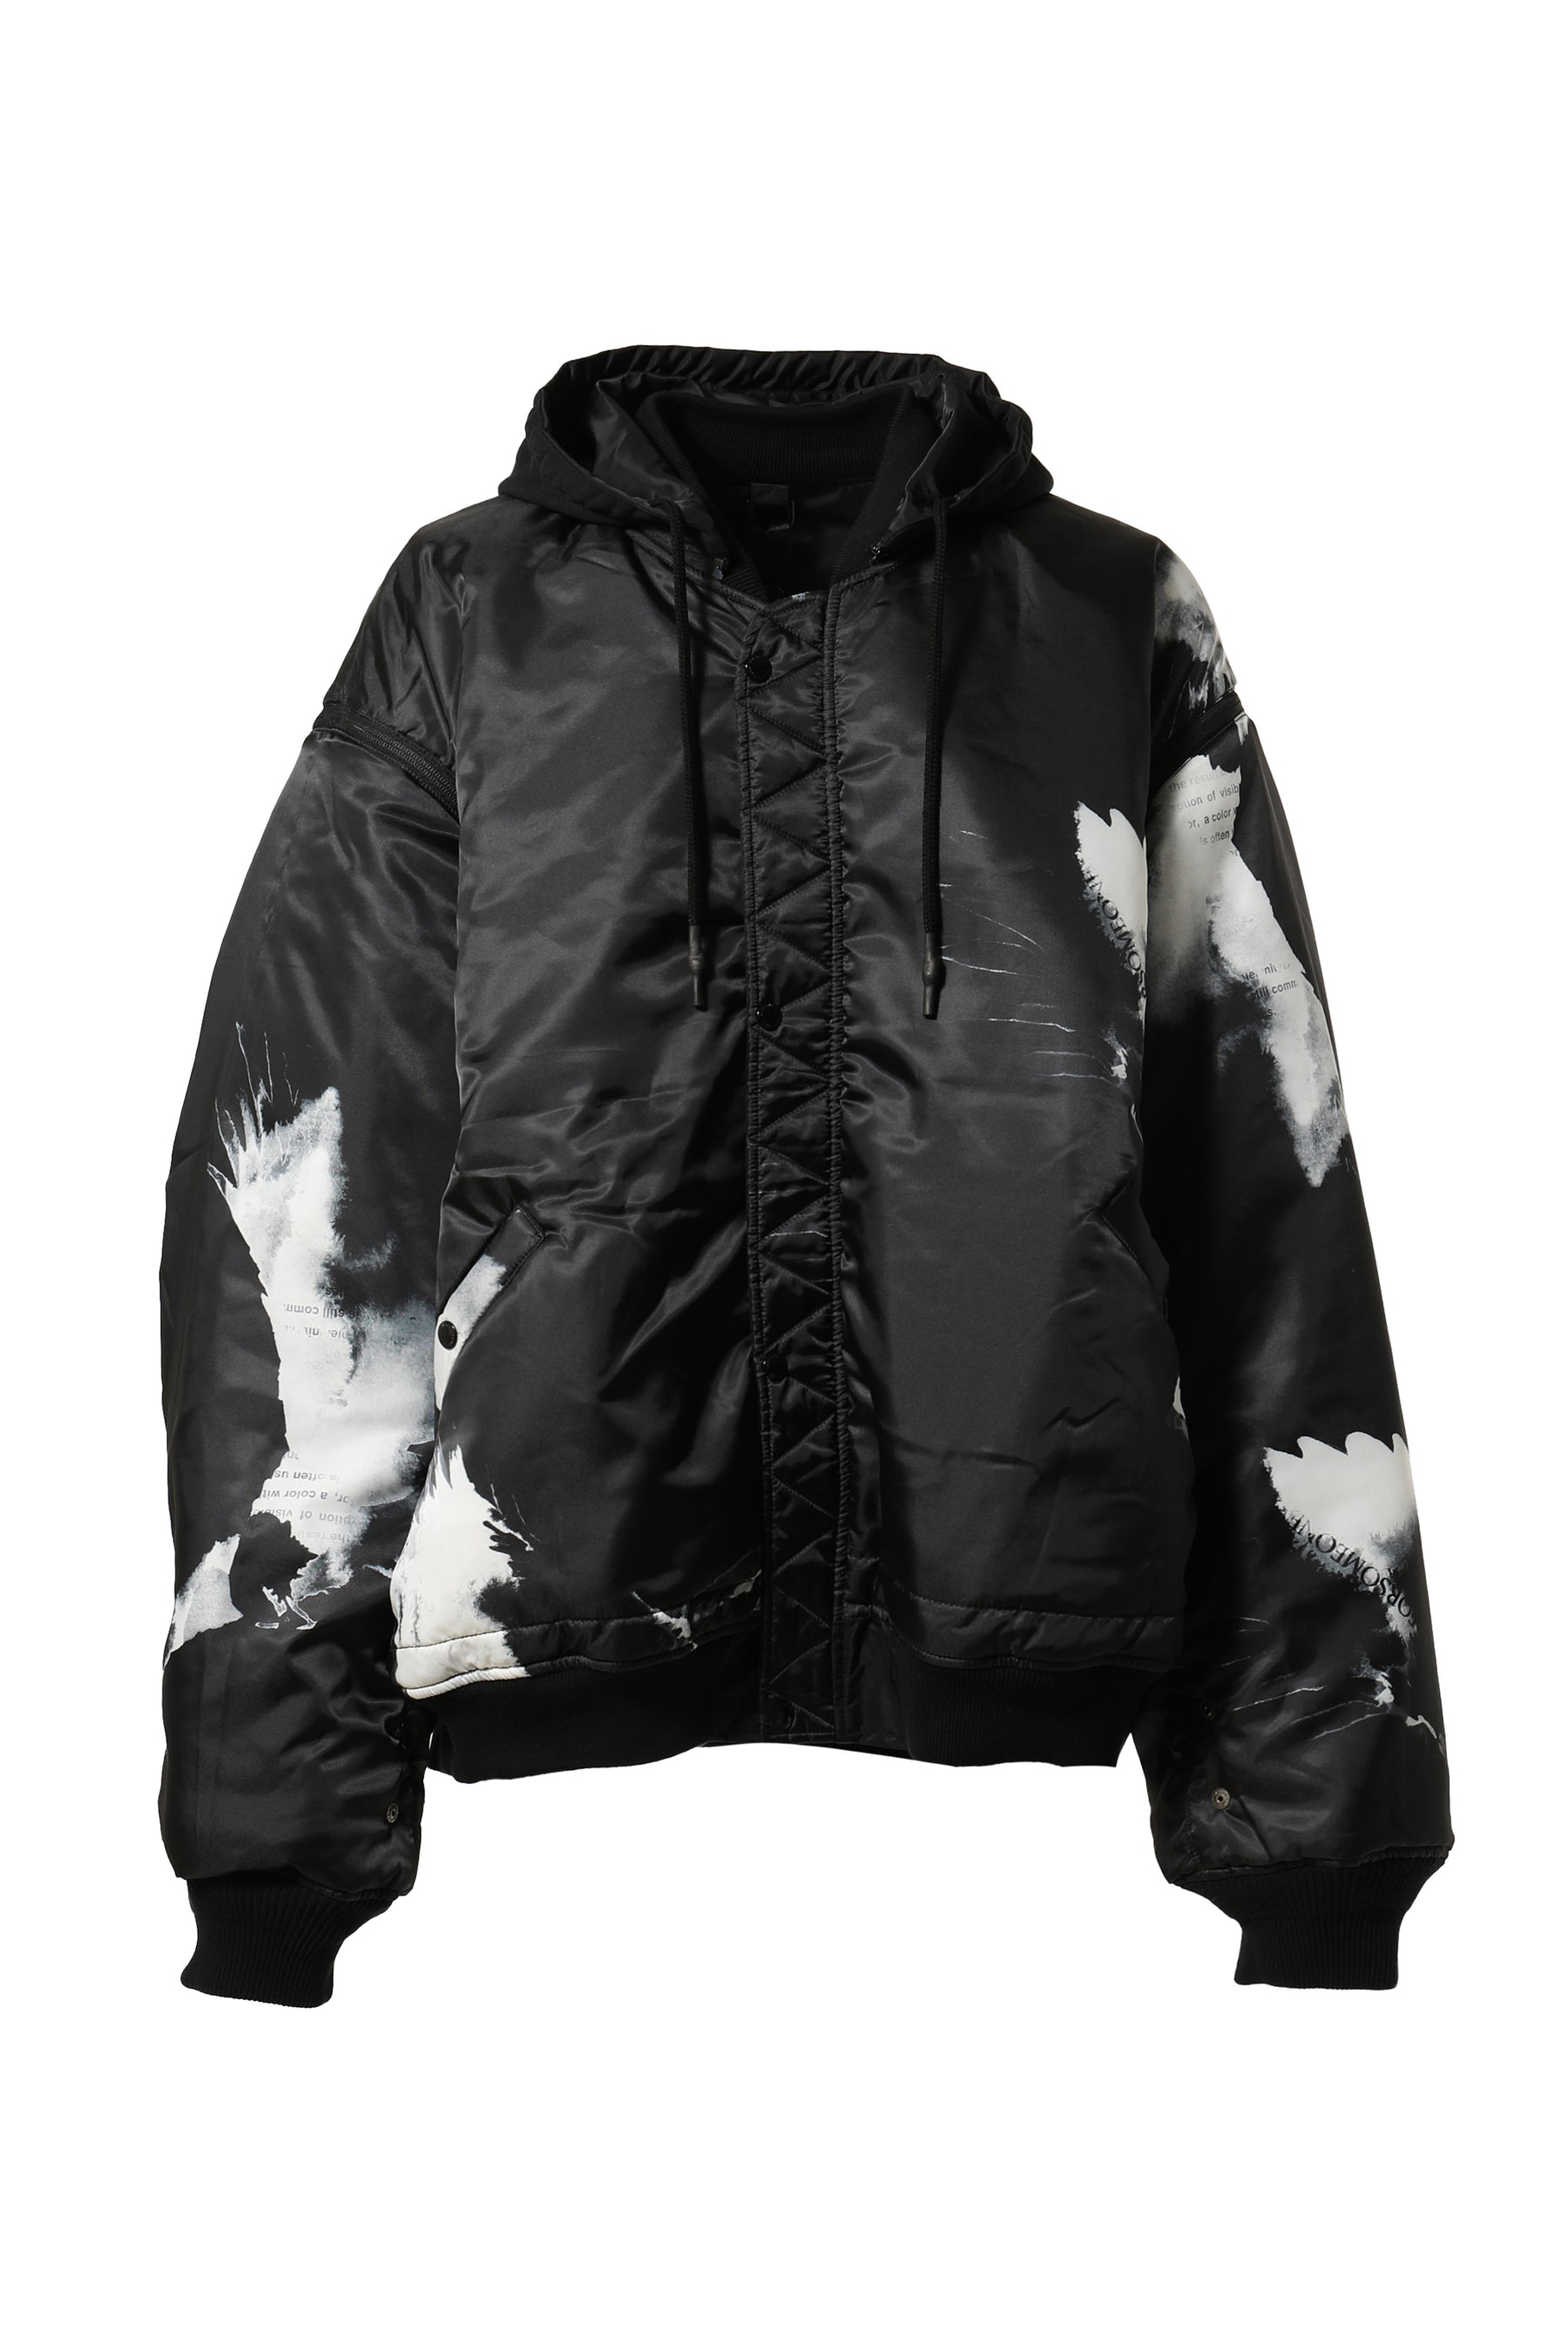 FORSOMEONE フォーサムワン FW23 6WAY BOMBER JACKET / BLK -NUBIAN